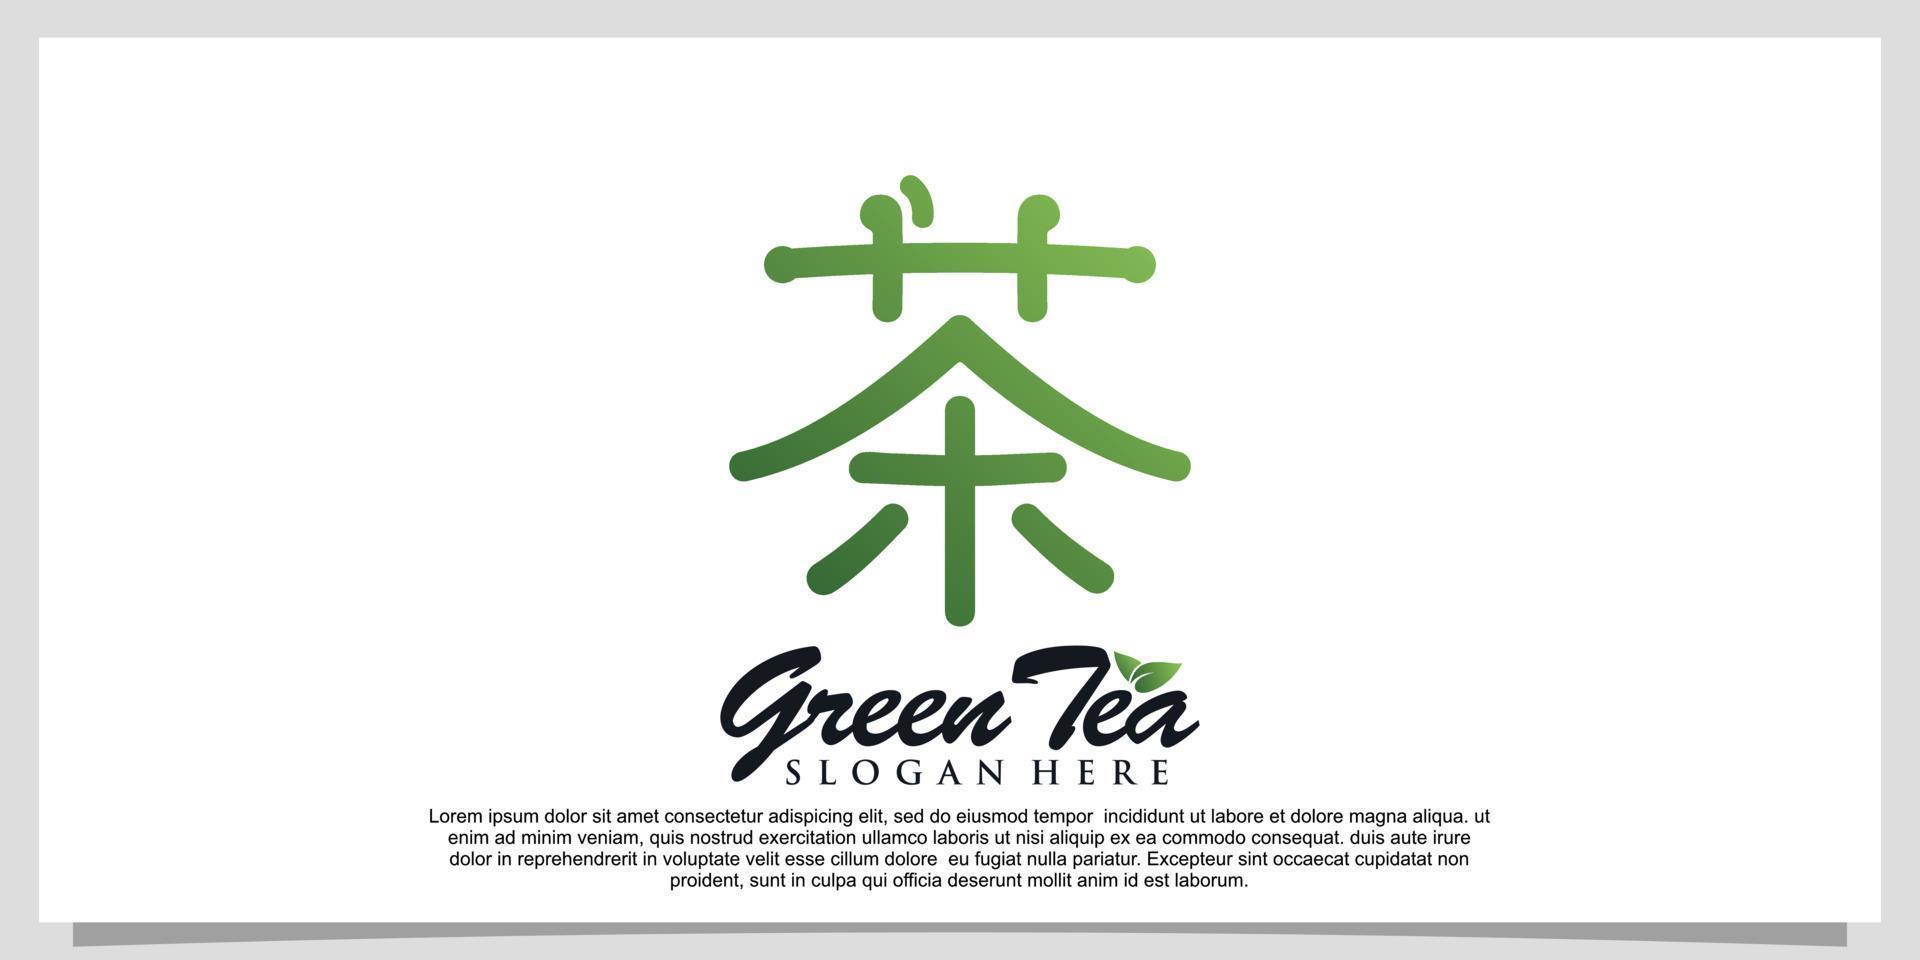 Green tea logo design and inspiration isolated on white background Premium Vector Part 2